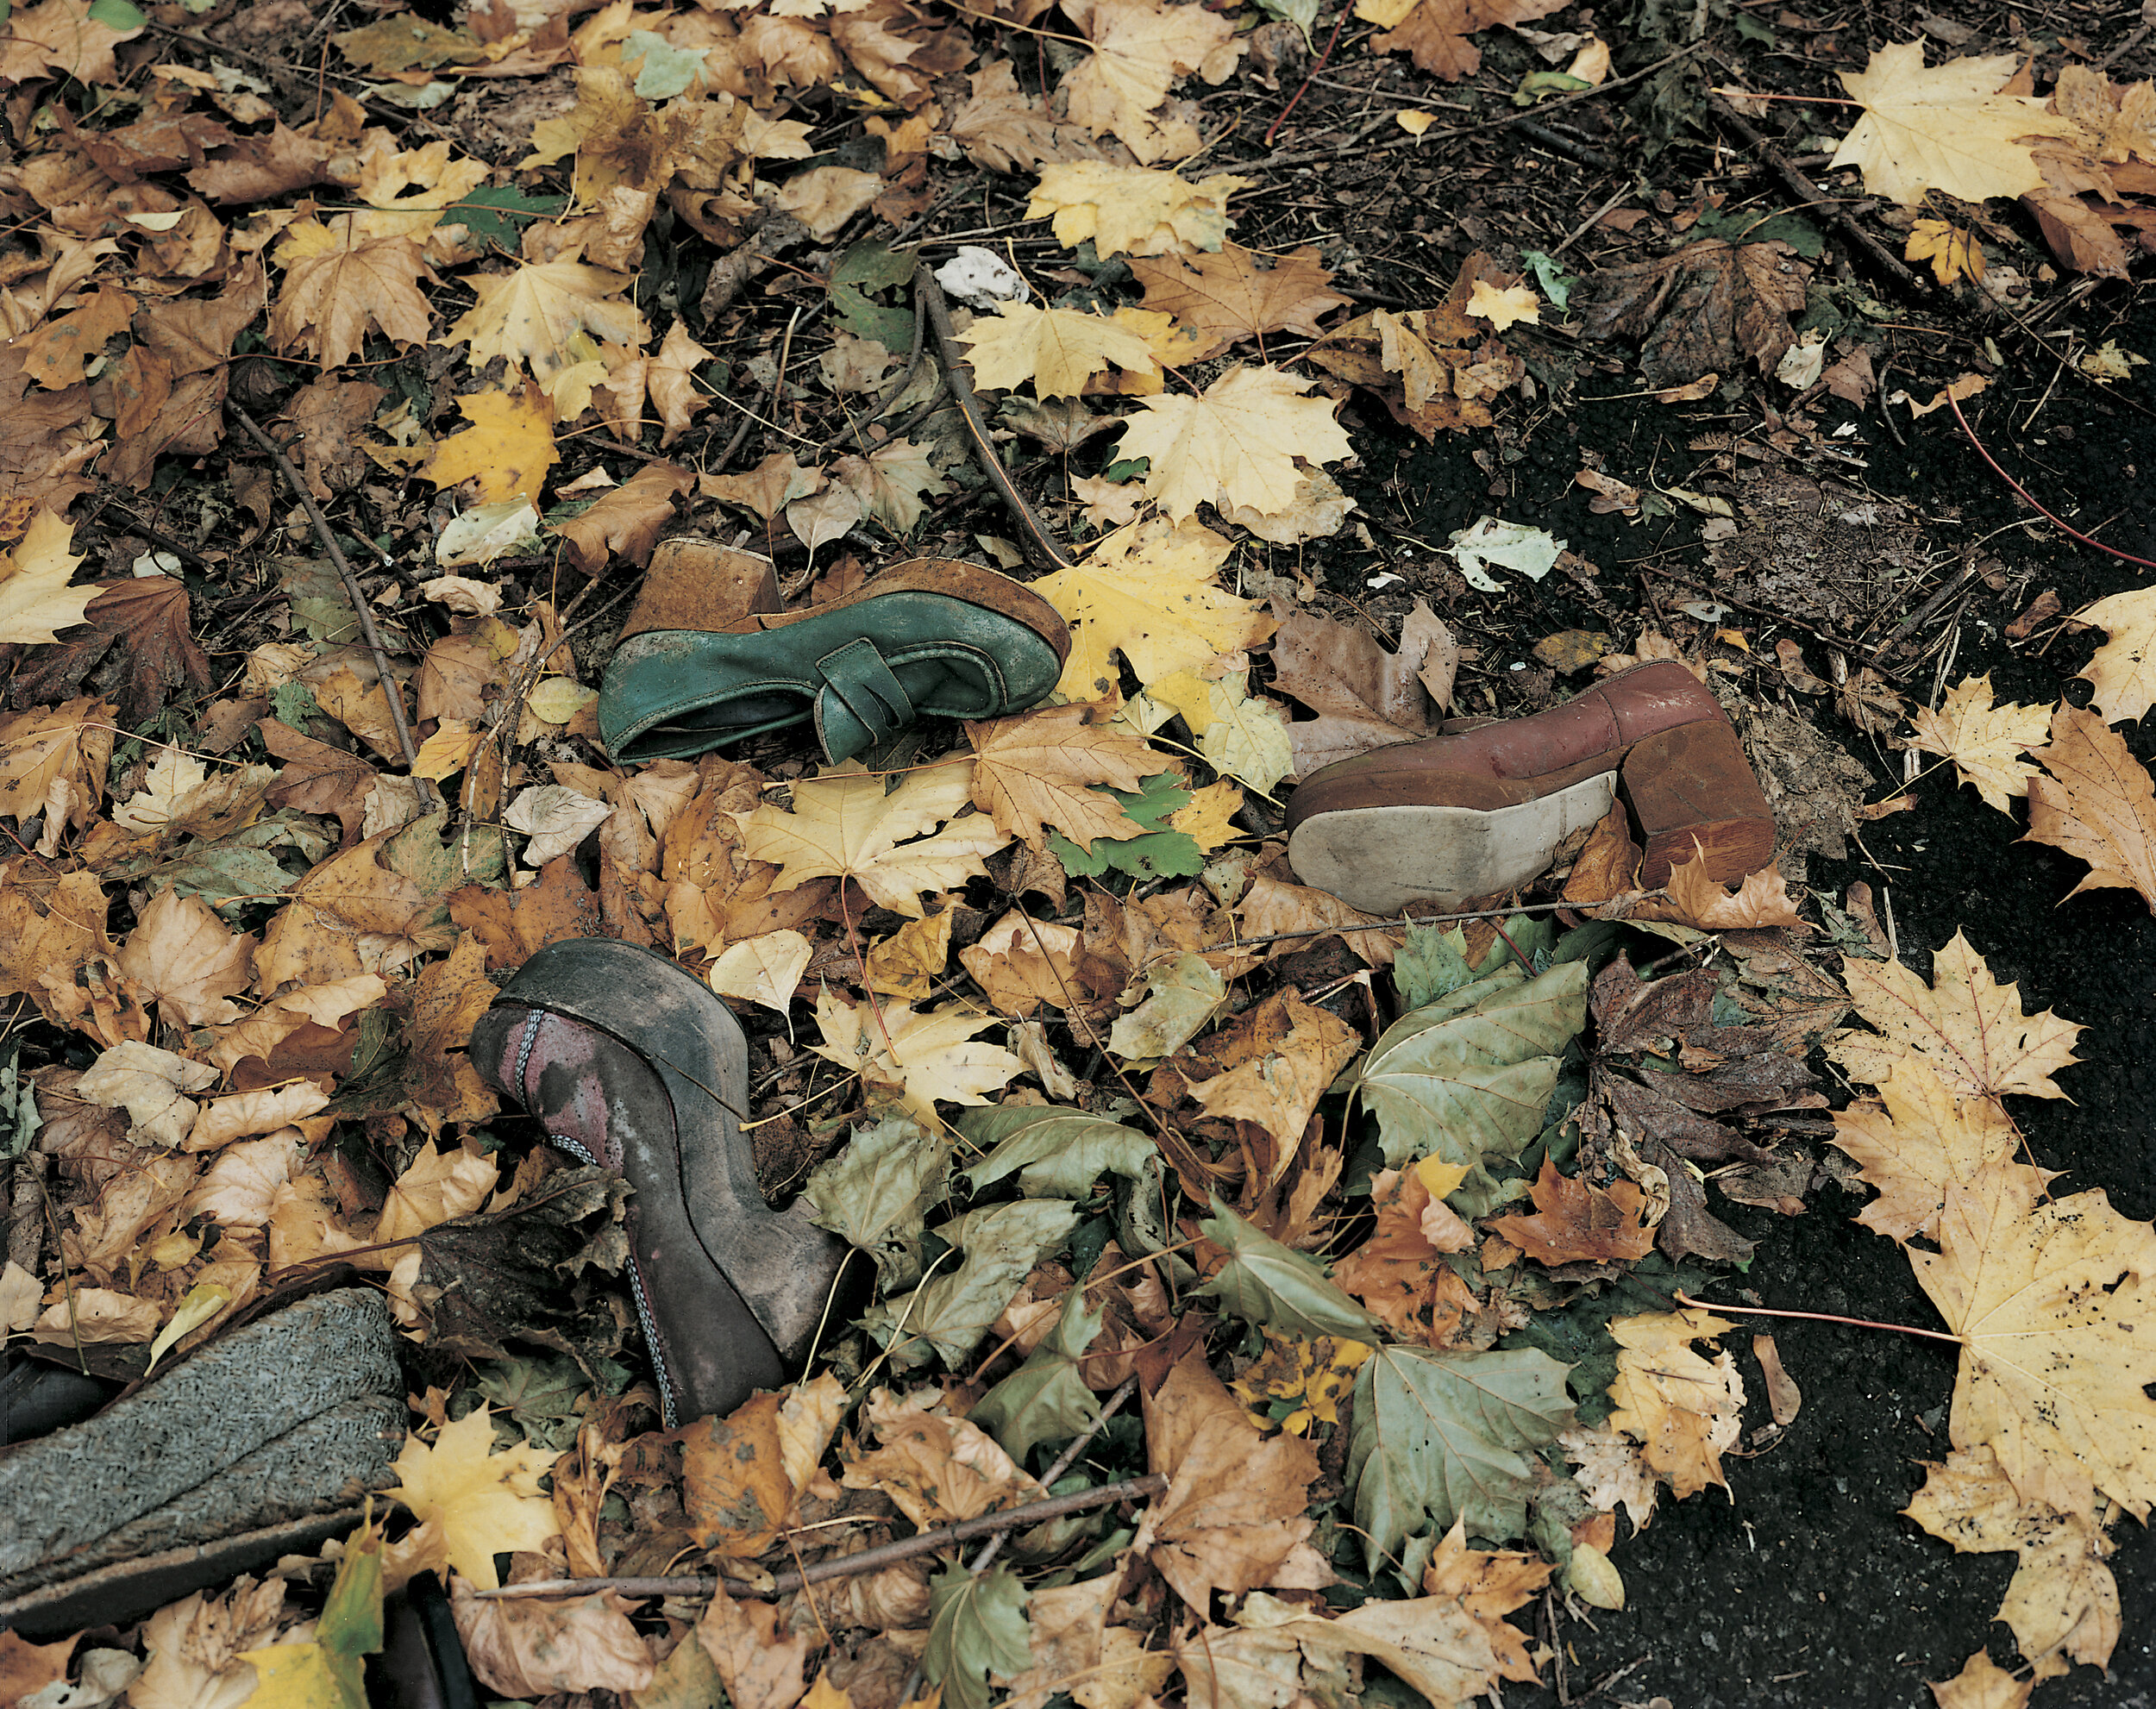 Shoes manufactured on Hart Island during the Phoenix House period, November 1991